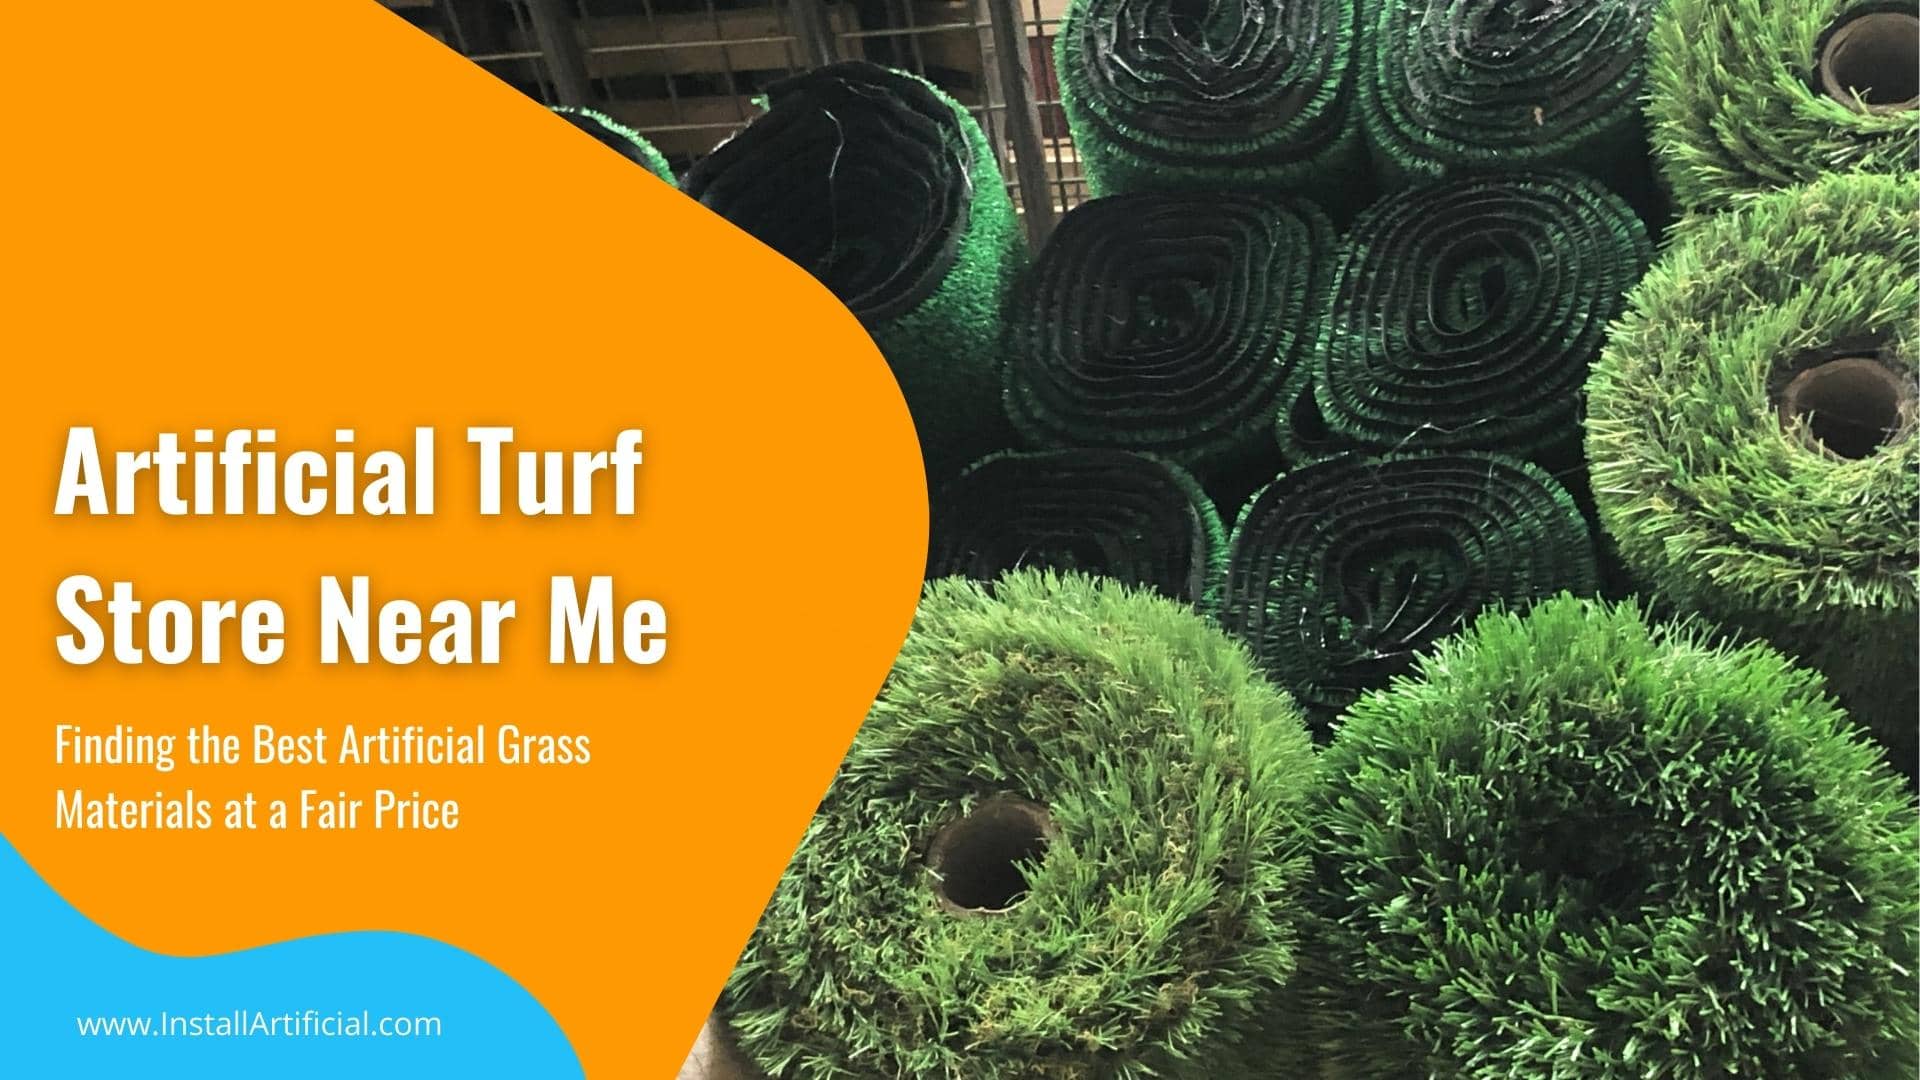 Artificial Turf Store Near Me